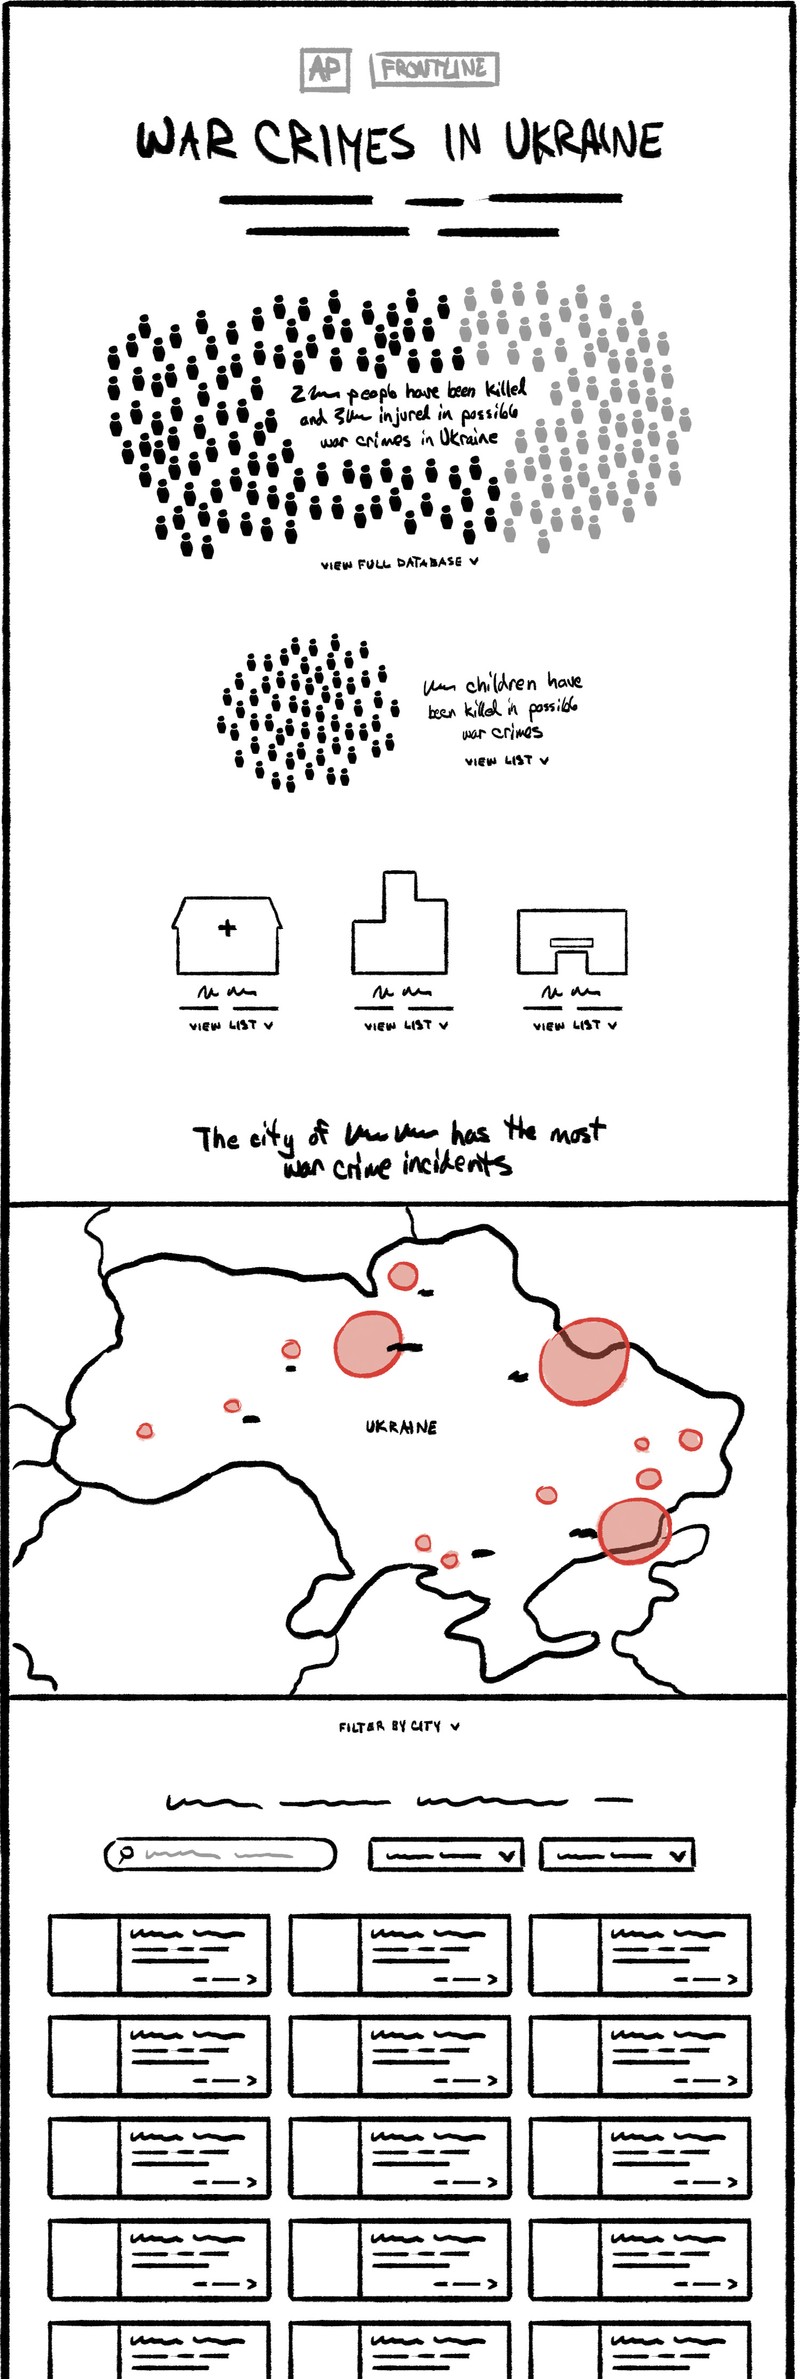 A sketch of a web application about potential war crimes in Ukraine. The scrolling page shows different visual representations of the data: icons of dead and injured, icons of buildings and a map with locations highlighted.